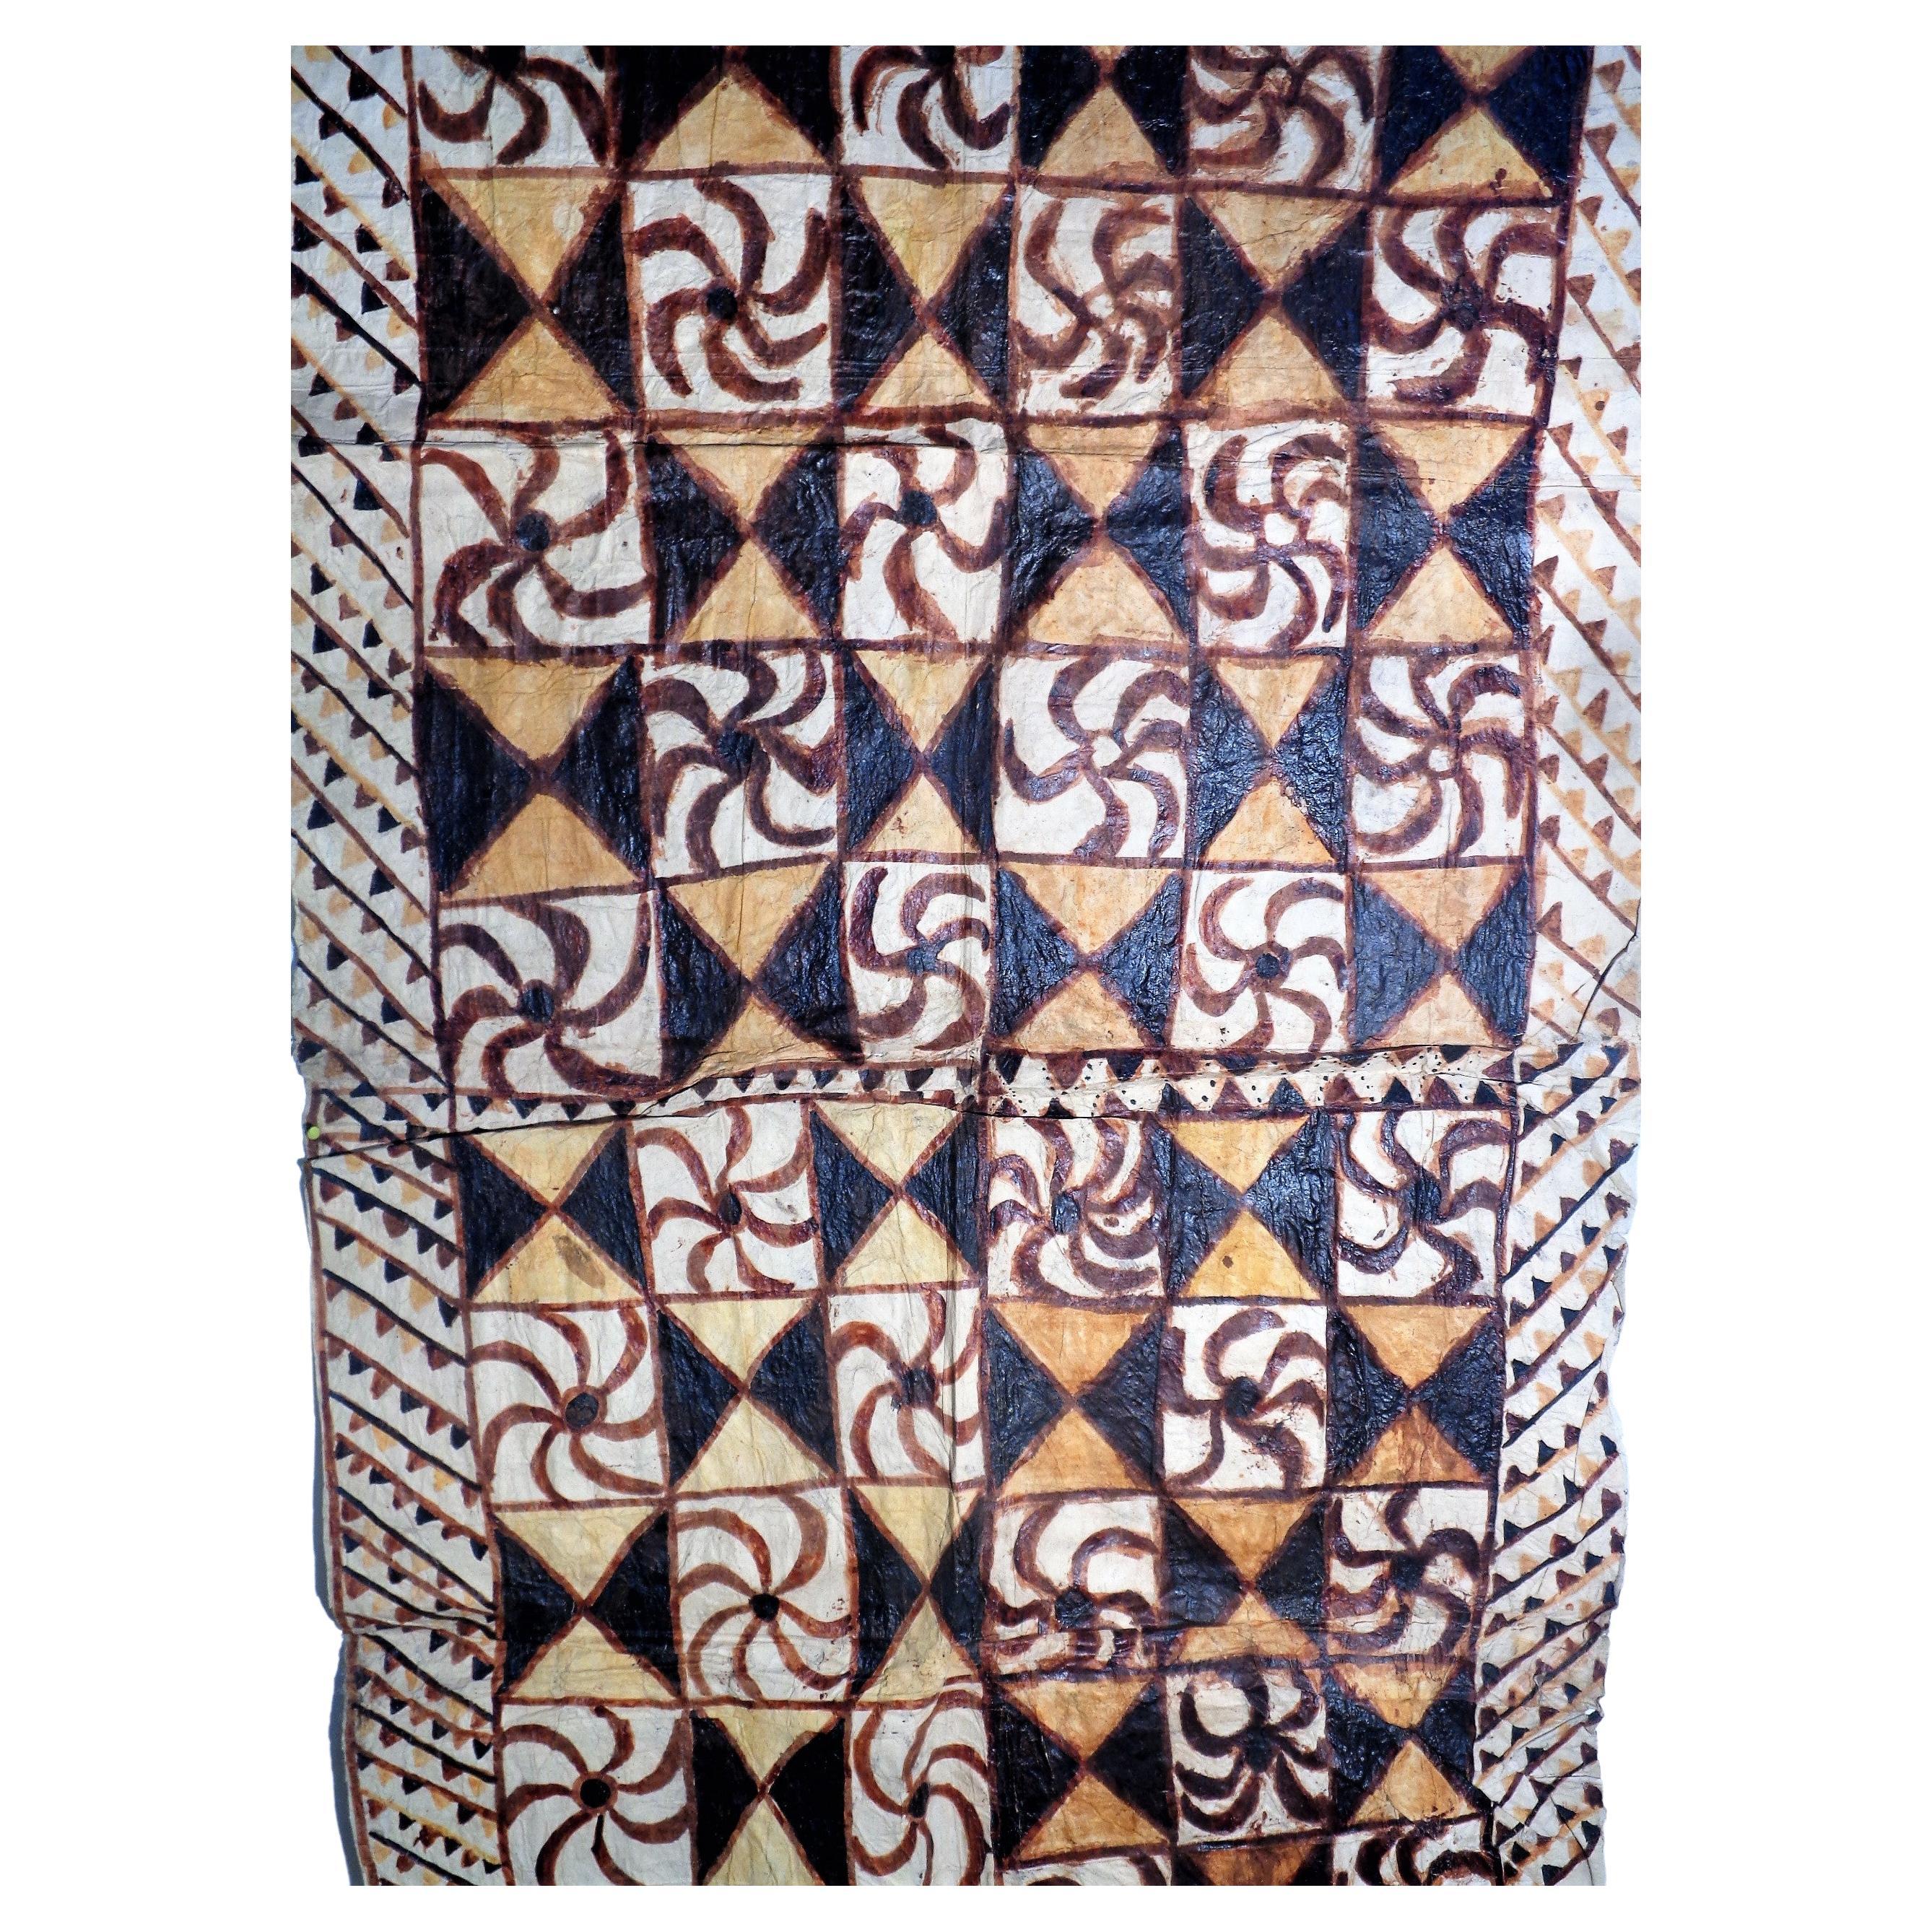 Antique 19th century Samoa Siapo ( `tapa cloth ) made from the inner bark of a mulberry tree / free hand paint decorated ( Siapo Mamanu ) with the natural dyes from plants, trees and clays. This large tapa cloth was descended in the family of